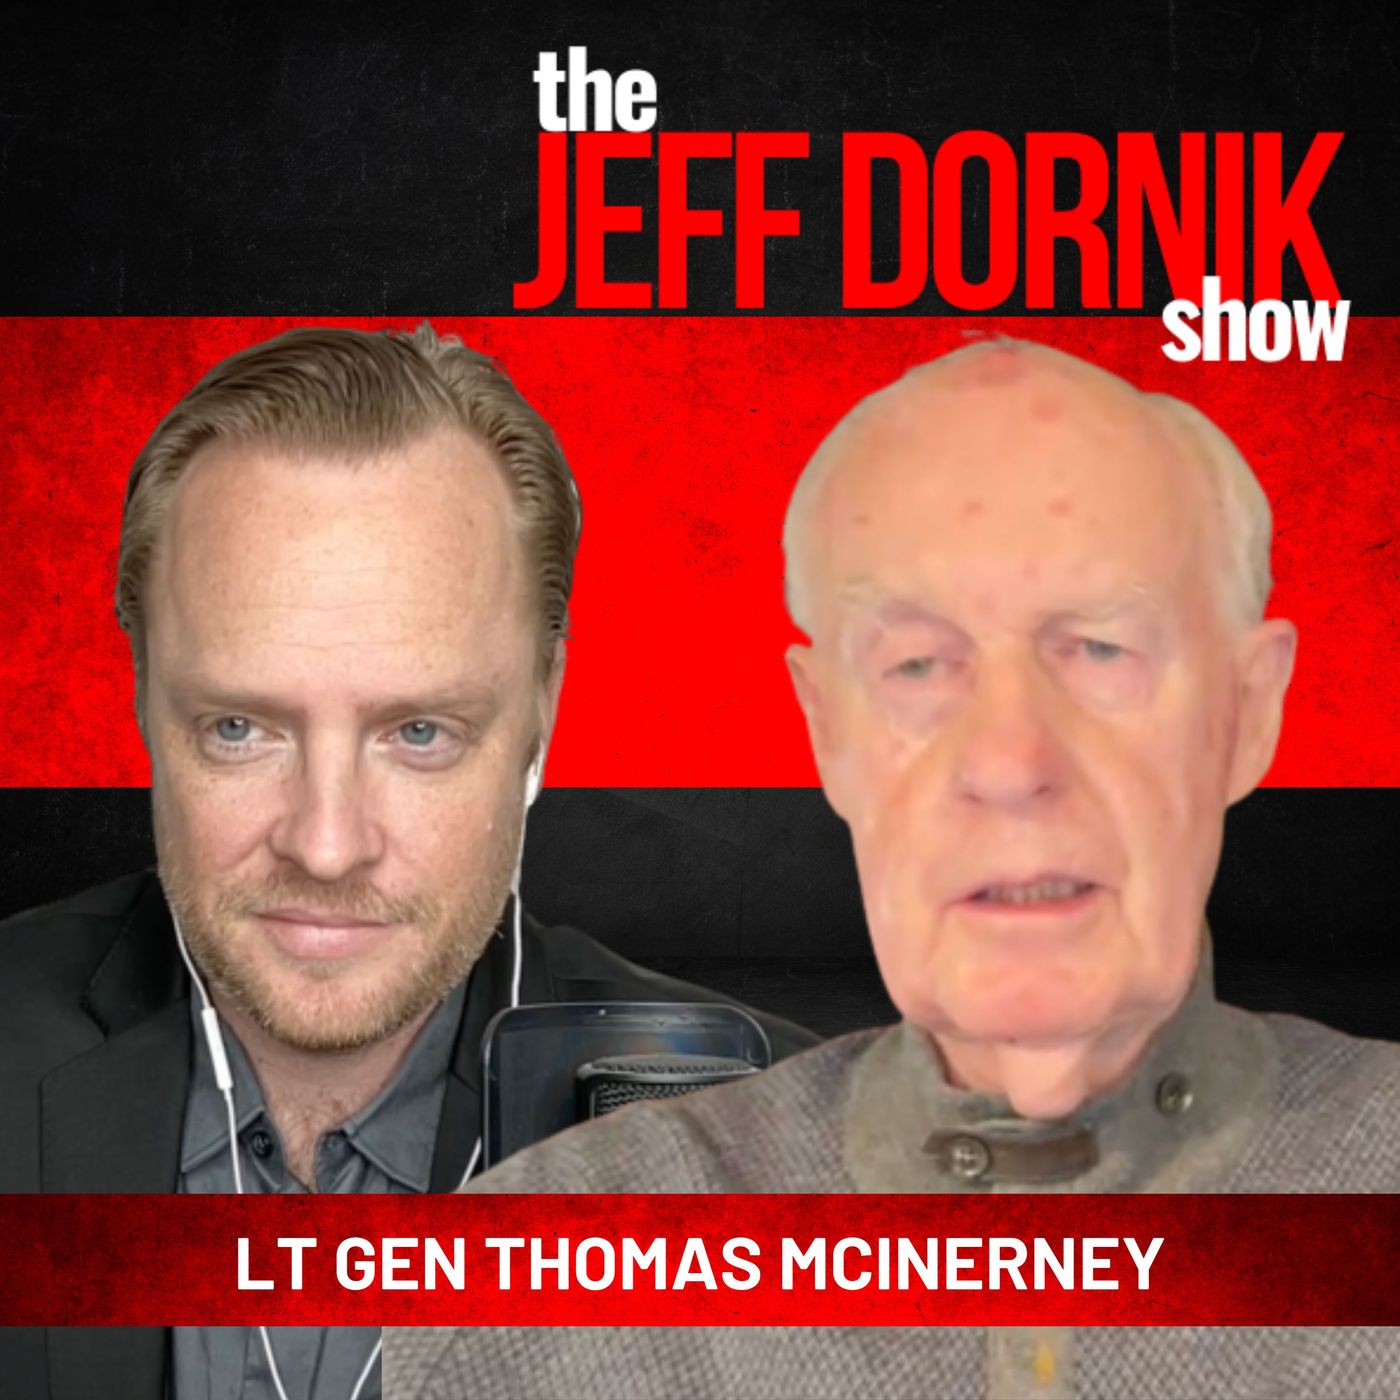 Lt Gen Thomas McInerney Warns That The Deep State Is Going to Rig the Mid-Term Elections Again… Here’s How To Stop Them